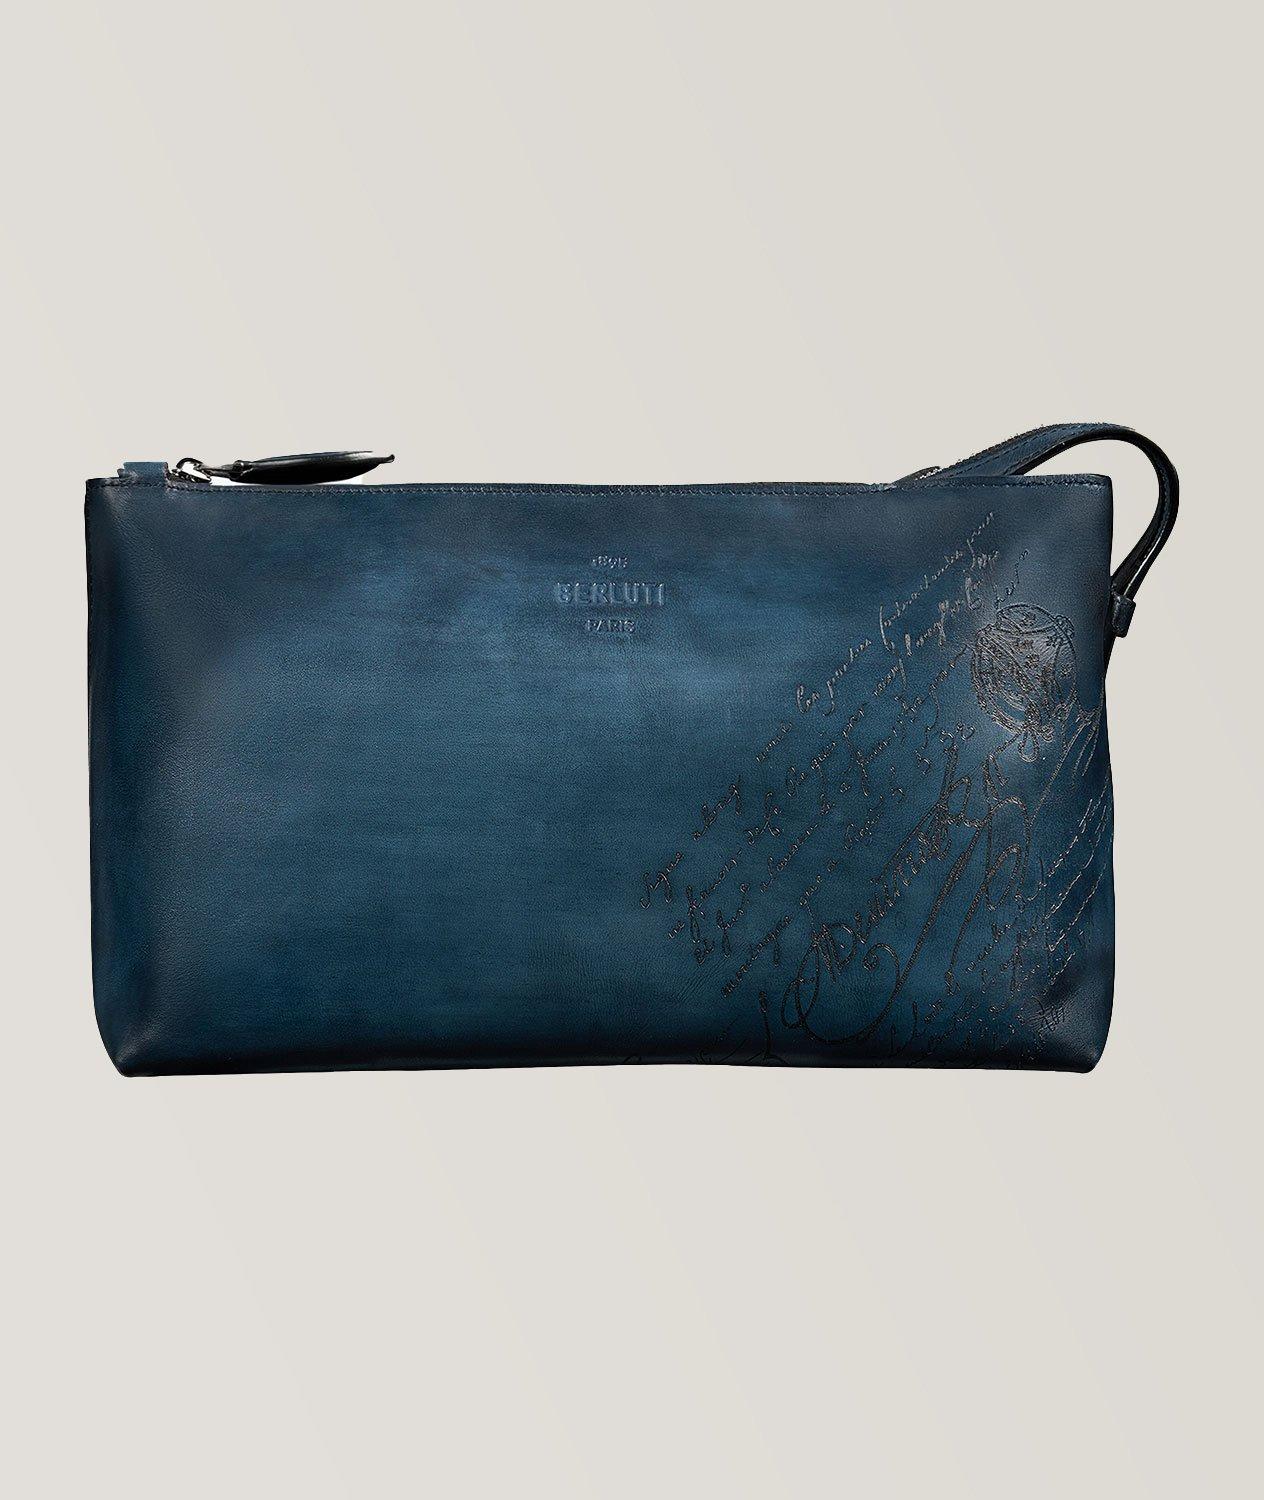 Ivy Scritto Leather Toiletry Bag image 0